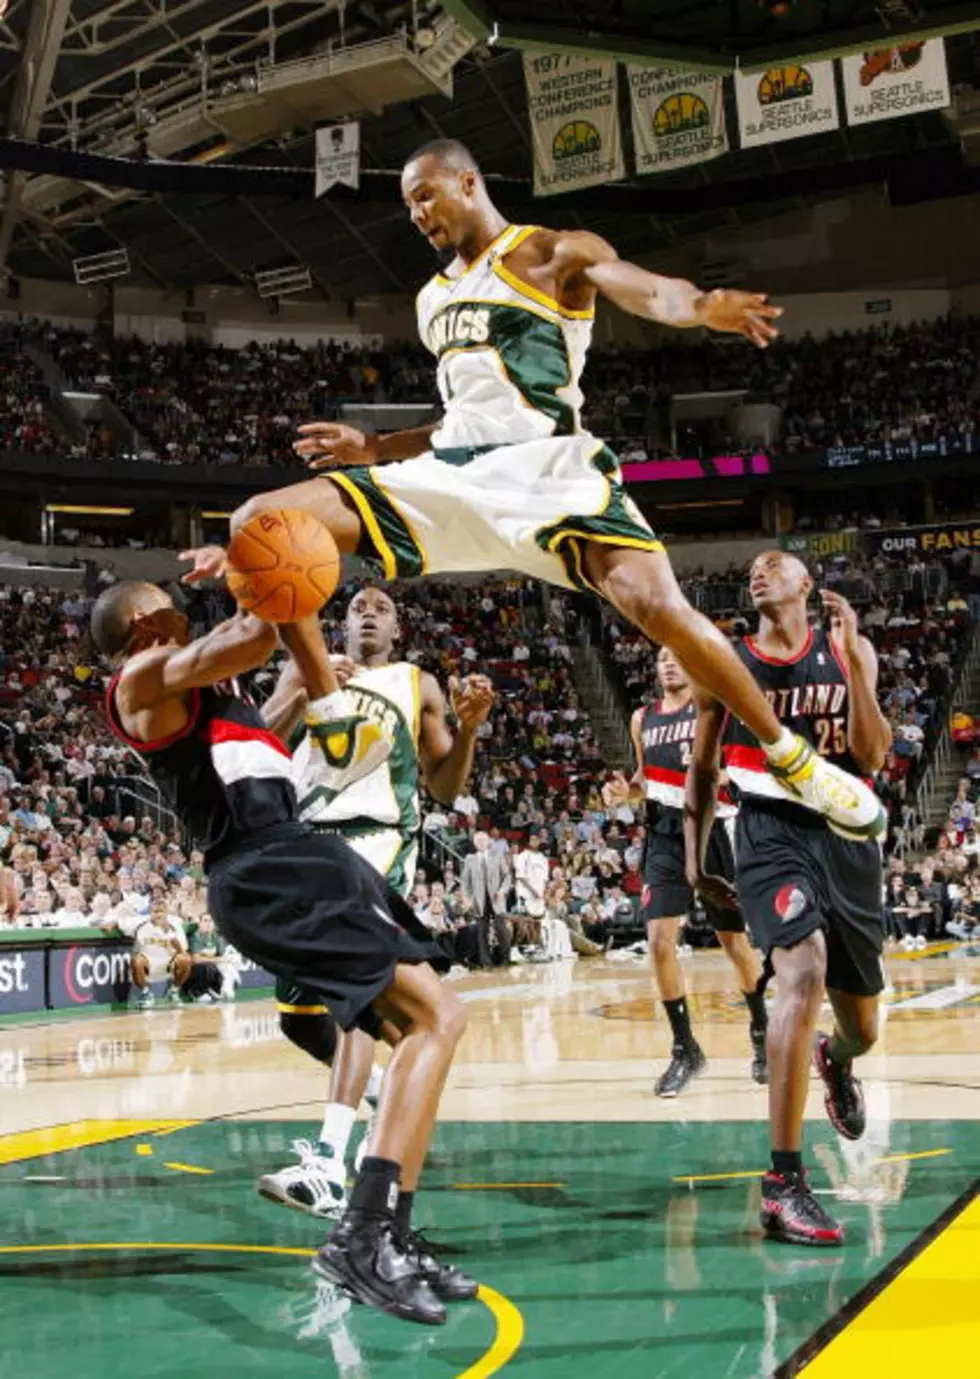 Seattle May FINALLY Get the Sonics Back!